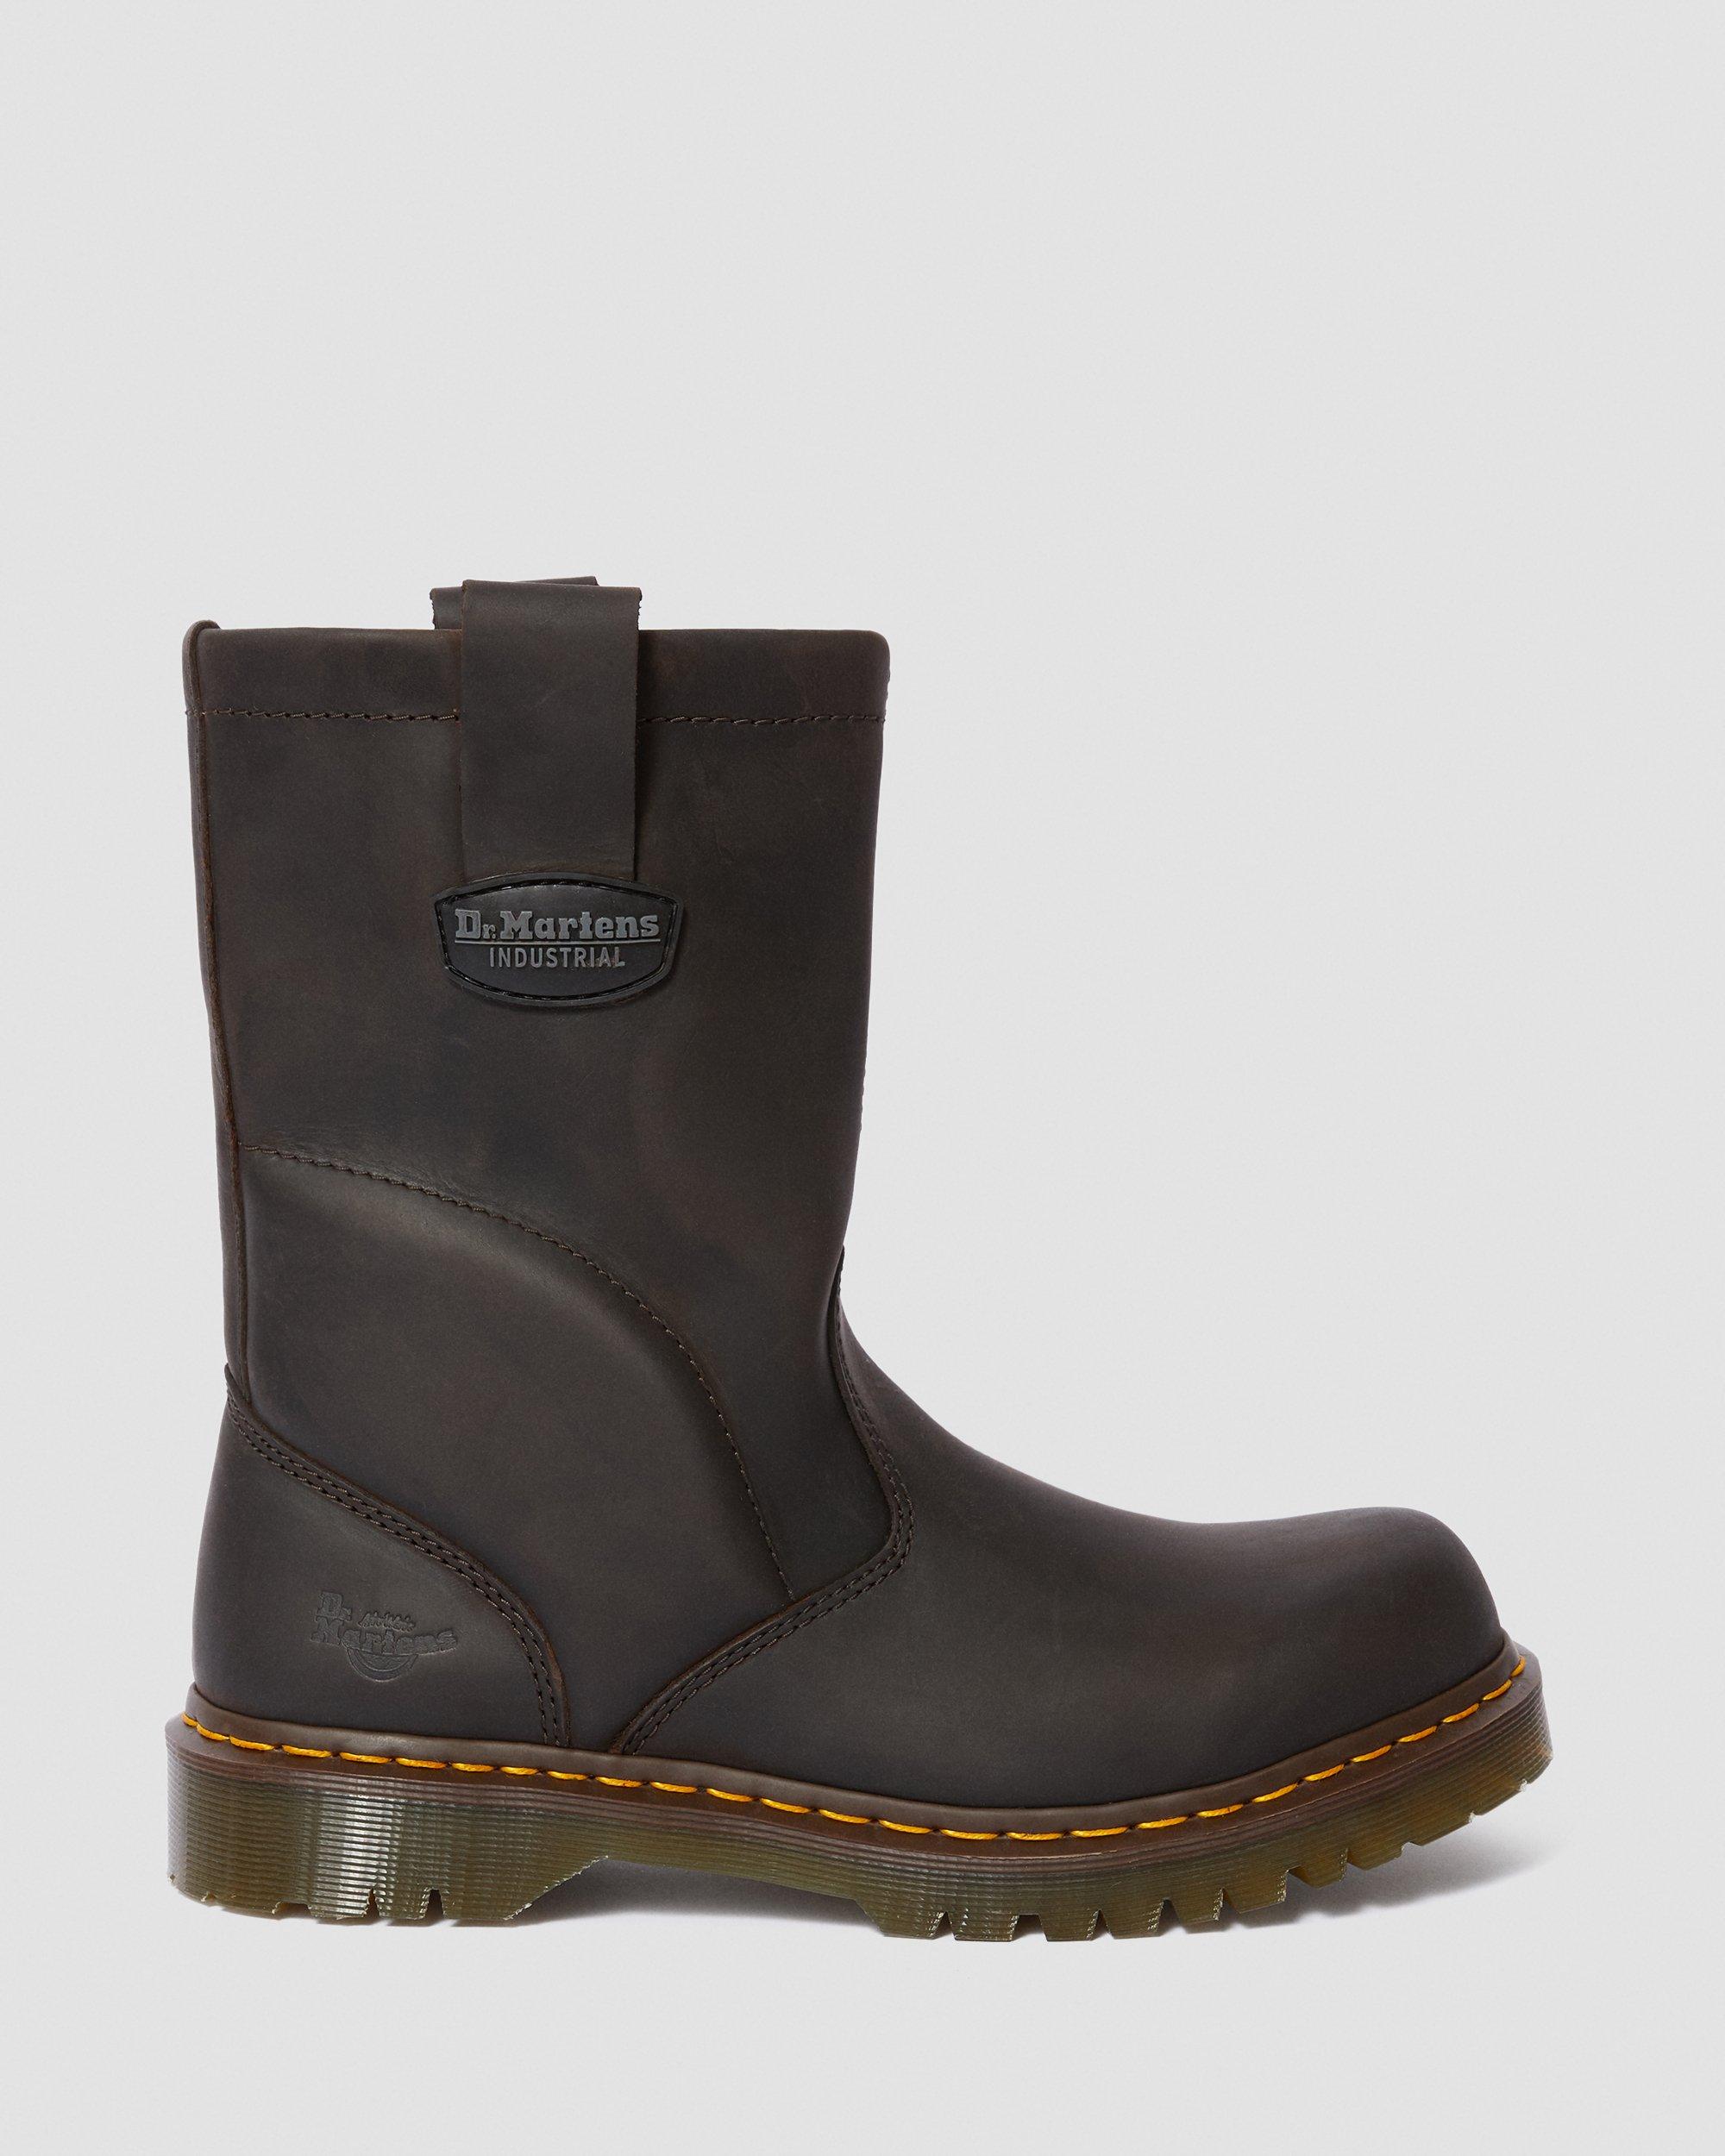 Icon 2296 Tall Work Boots in Dark Brown | Dr. Martens